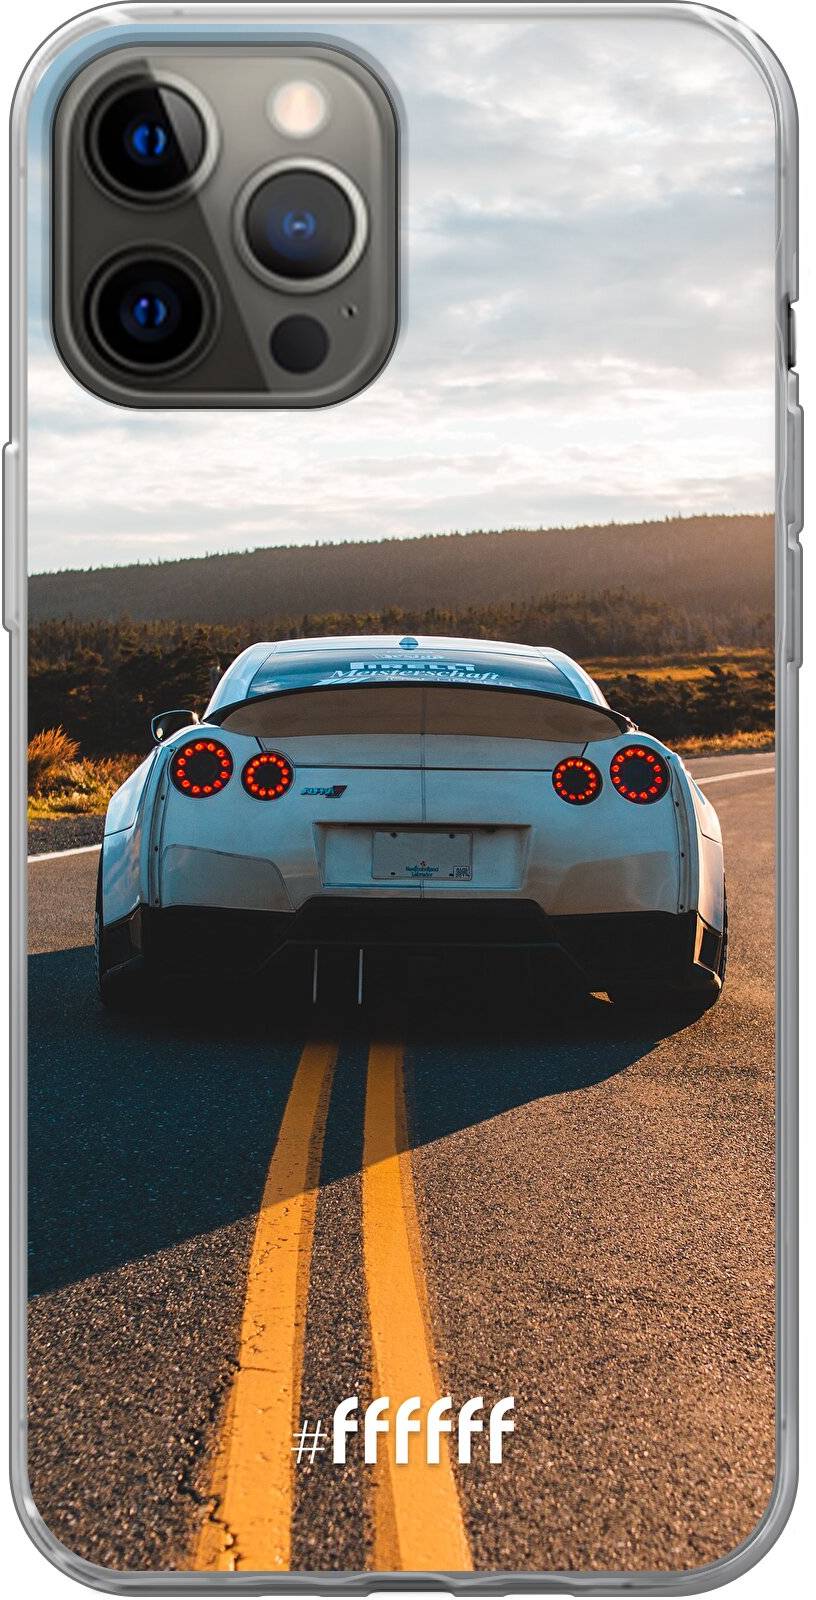 Silver Sports Car iPhone 12 Pro Max